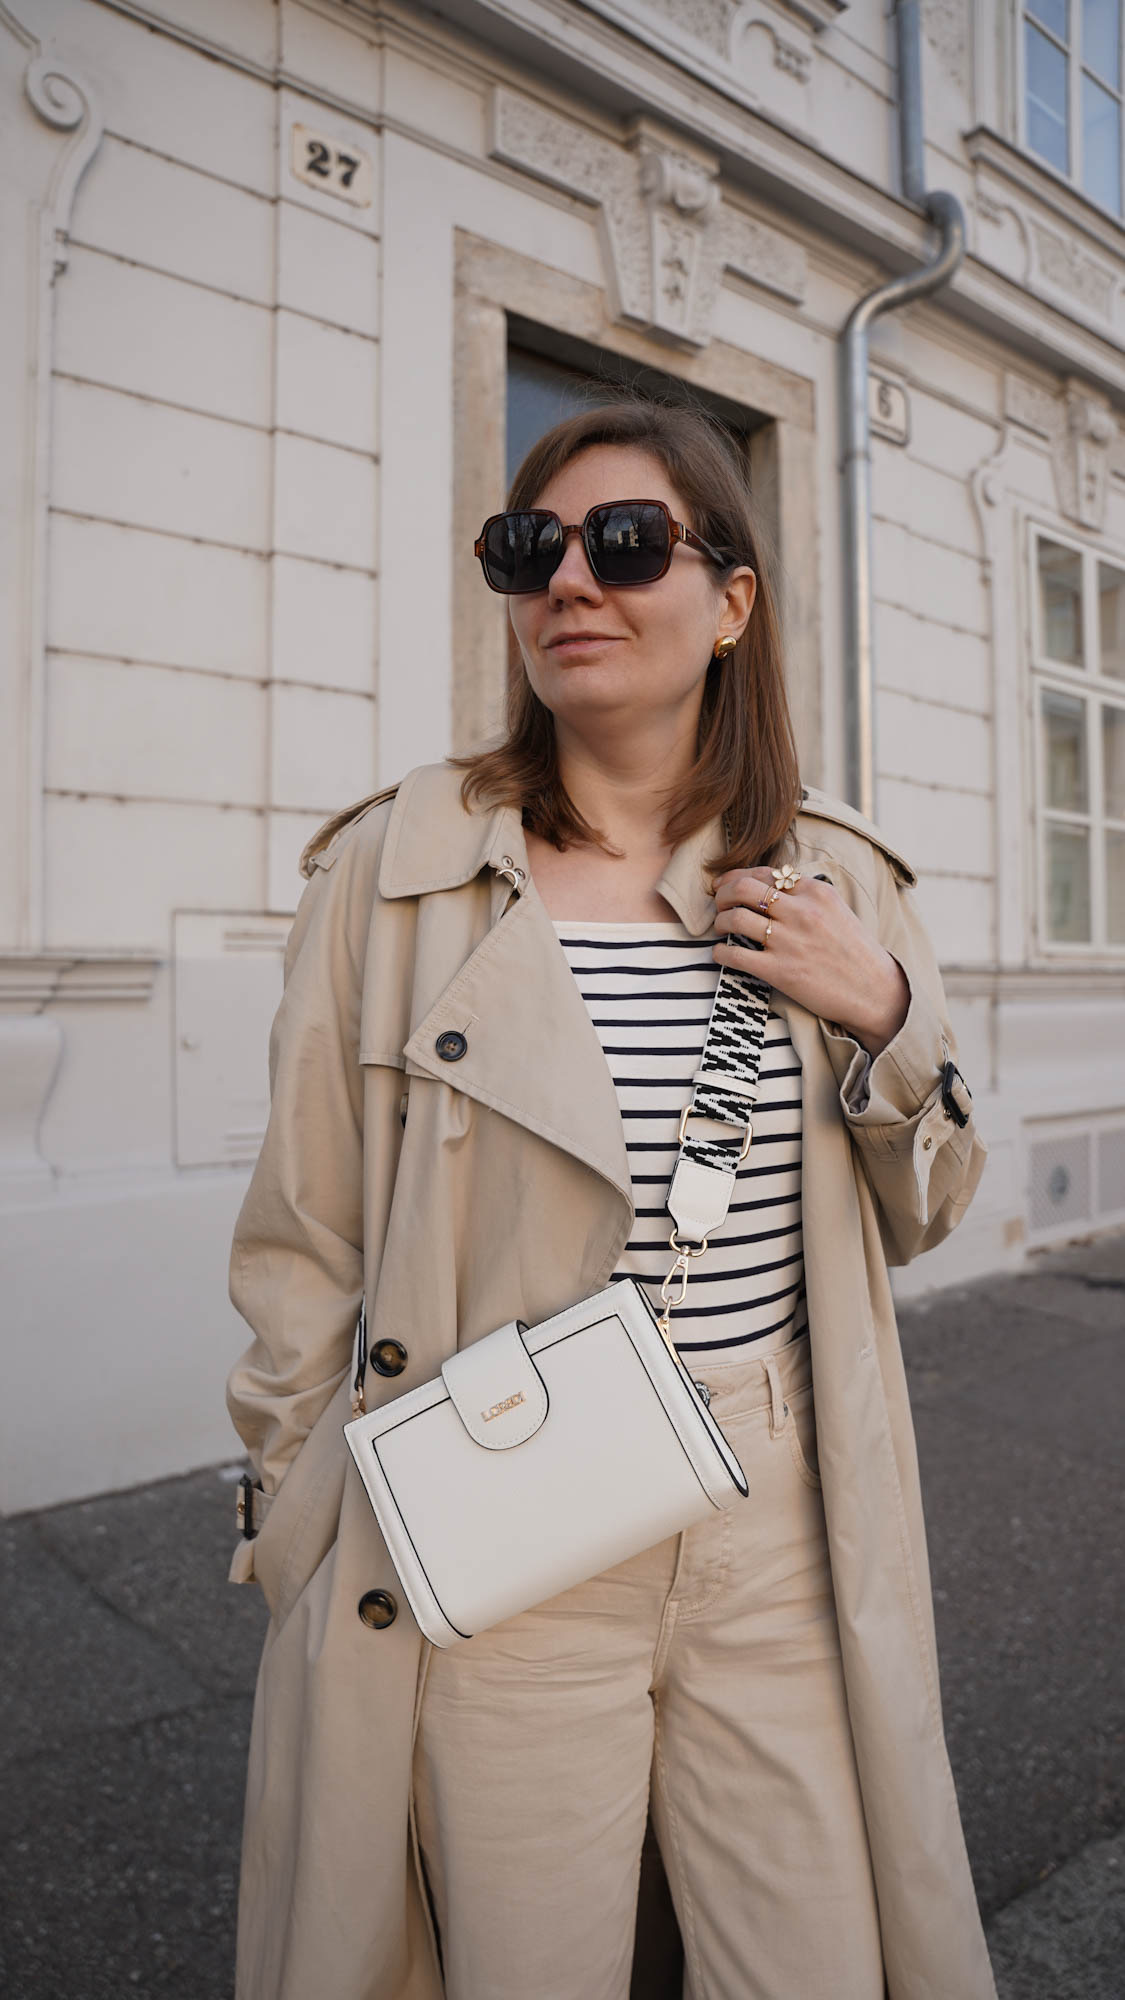 Beige Trenchcoat, s.oliver Streifenshirt, beige Jeans, straight Jeans, spring outfit